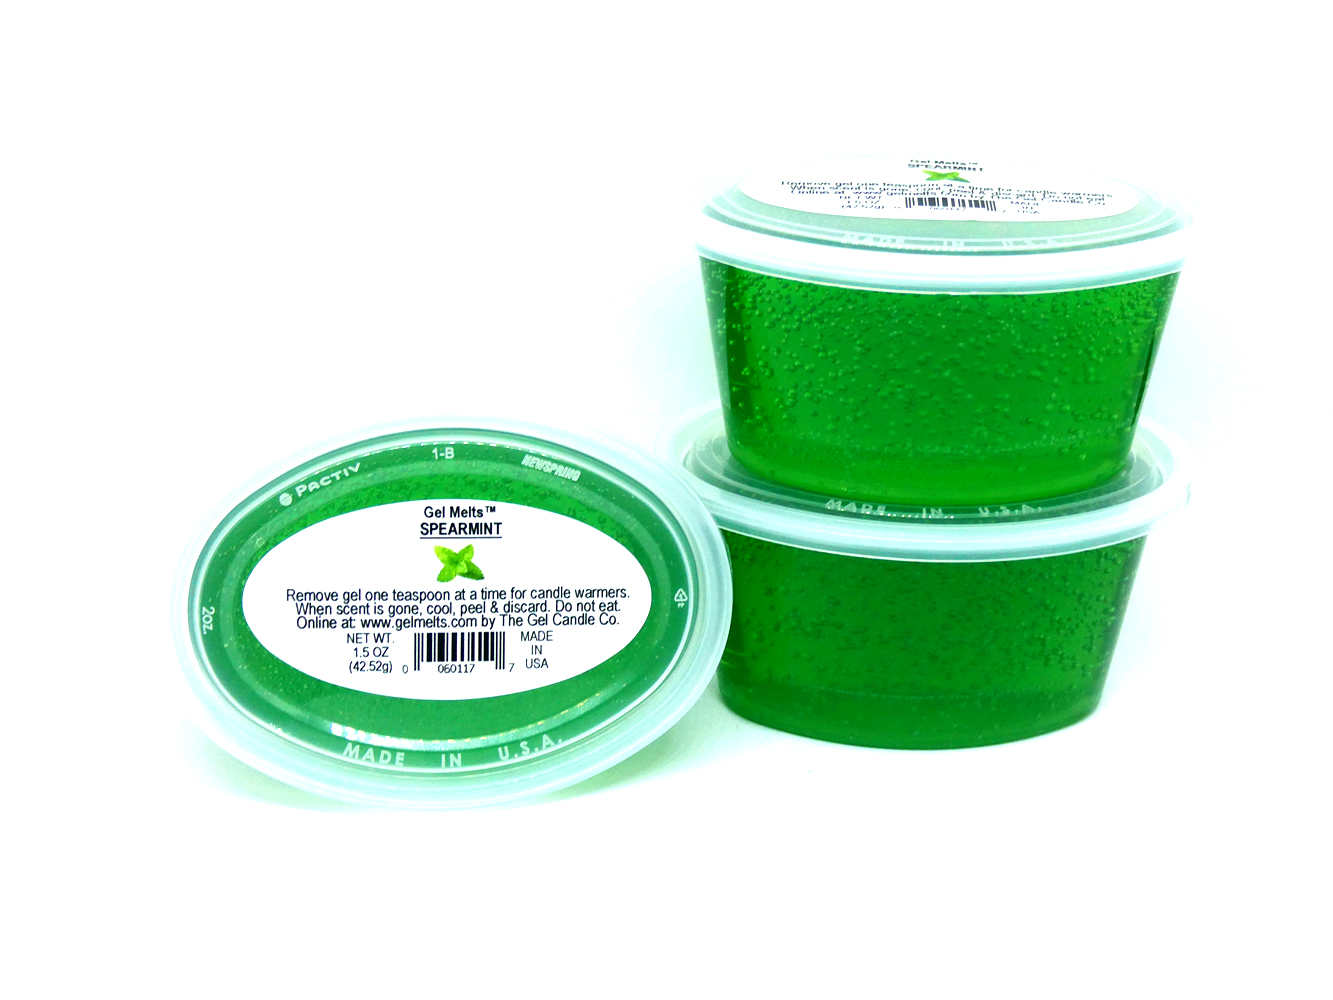 Spearmint Scented Gel Melts™ Gel Wax for warmers - 3 pack - Click Image to Close